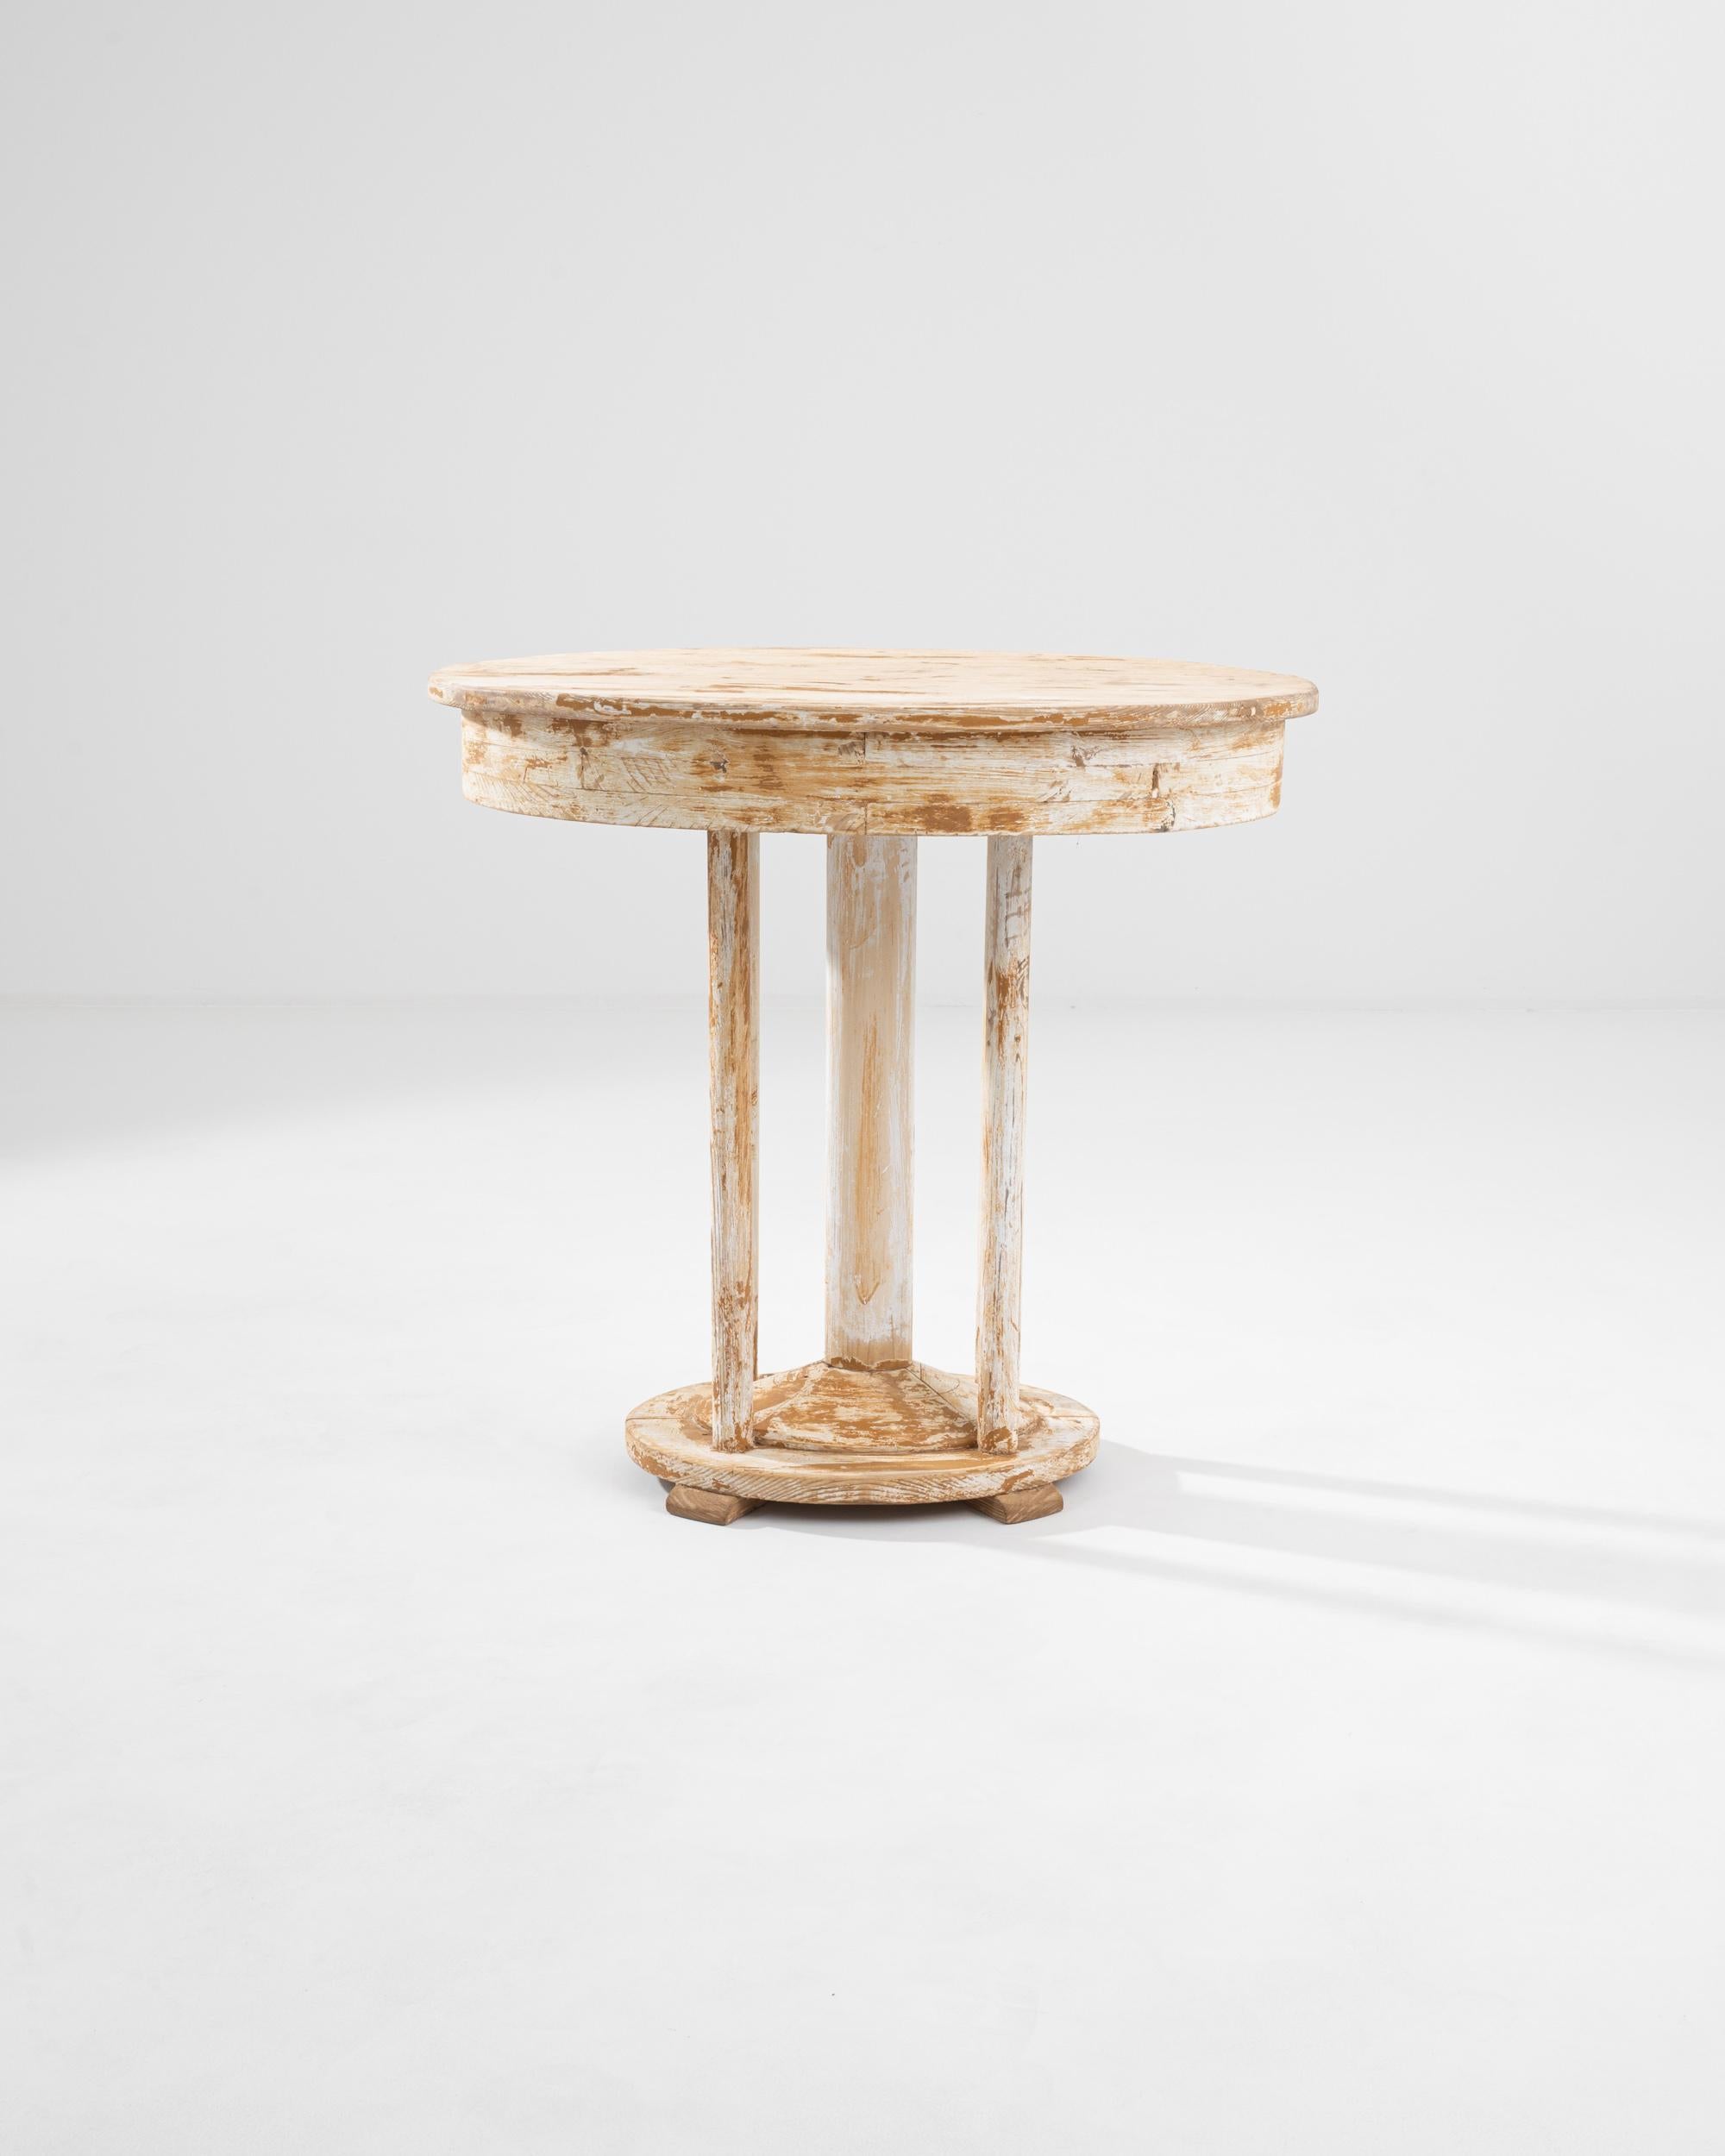 Balancing elegant simplicity with timeworn charm, this wooden side table offers a unique vintage accent. Made in Central Europe in the 1920s, the form evokes the bold shapes of Art Deco, while the distressed patina of the painted surface lends a